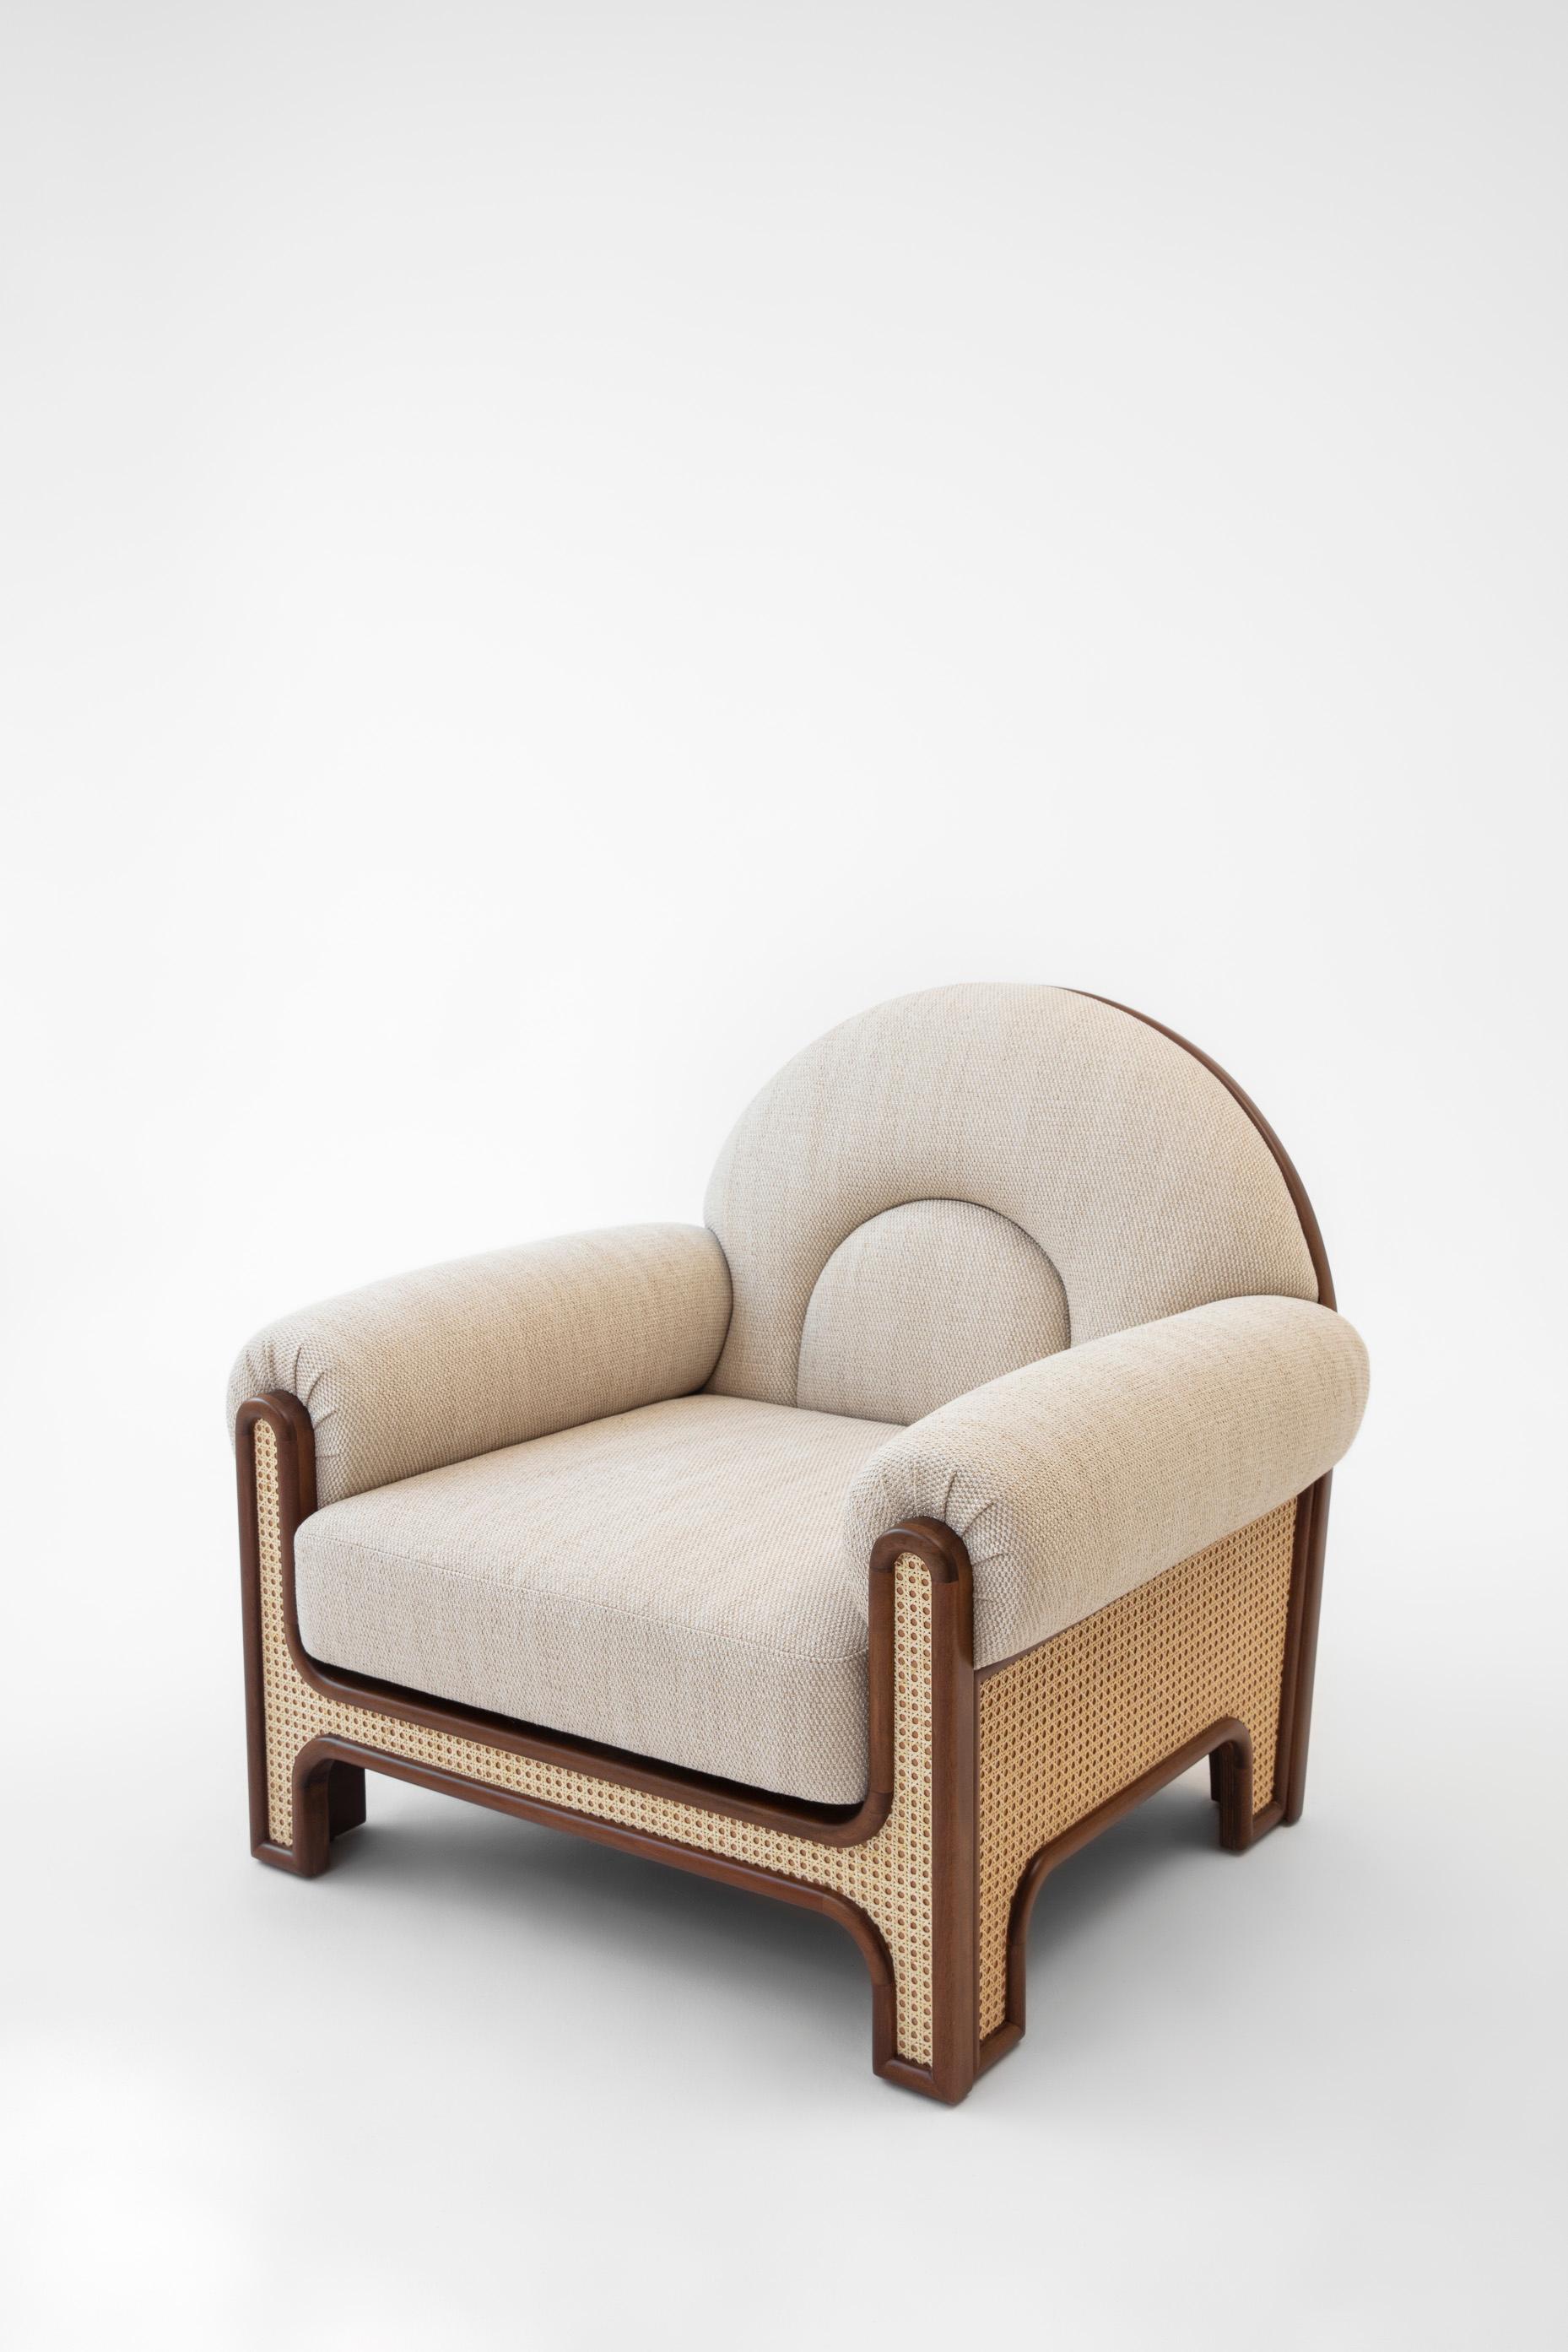 The N-gene armchair is a reinterpretation of an armchair designed by Merve’s uncle, interior designer, Engine, in the 1970s. The N-Gene is re-envisioned with caning, and is upholstered in beige colored fabric. This entirely handcrafted armchair is